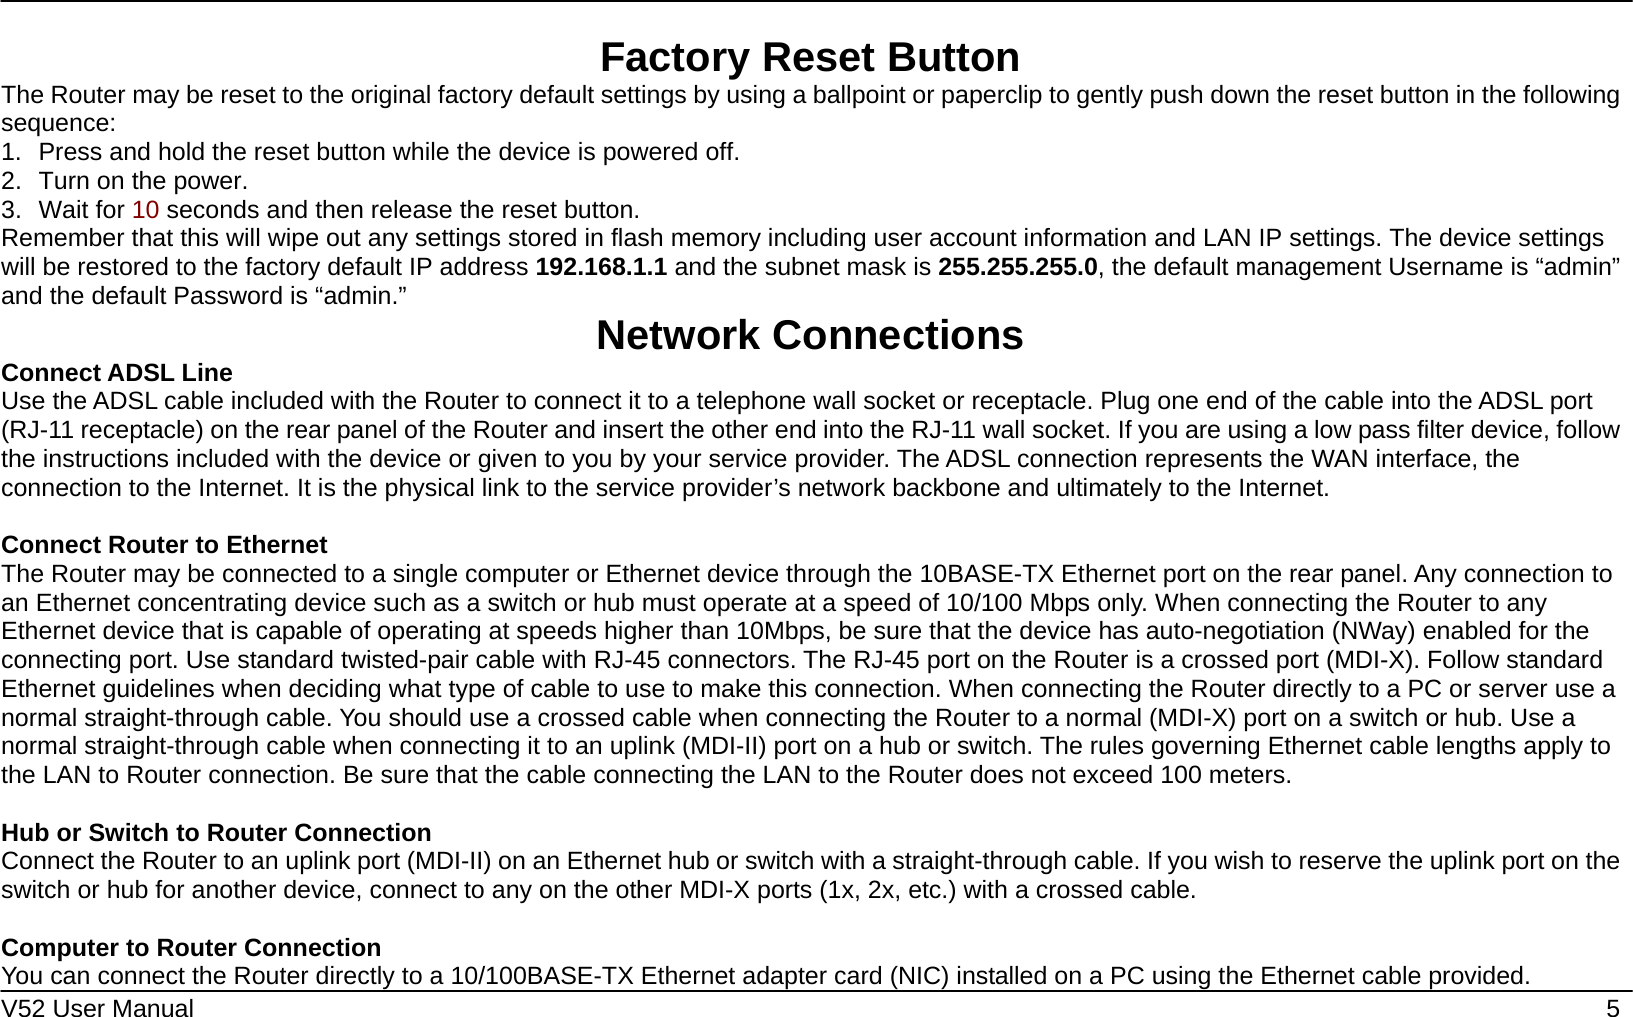    V52 User Manual    5 Factory Reset Button The Router may be reset to the original factory default settings by using a ballpoint or paperclip to gently push down the reset button in the following sequence:  1.  Press and hold the reset button while the device is powered off. 2.  Turn on the power. 3. Wait for 10 seconds and then release the reset button.   Remember that this will wipe out any settings stored in flash memory including user account information and LAN IP settings. The device settings will be restored to the factory default IP address 192.168.1.1 and the subnet mask is 255.255.255.0, the default management Username is “admin” and the default Password is “admin.”  Network Connections   Connect ADSL Line Use the ADSL cable included with the Router to connect it to a telephone wall socket or receptacle. Plug one end of the cable into the ADSL port (RJ-11 receptacle) on the rear panel of the Router and insert the other end into the RJ-11 wall socket. If you are using a low pass filter device, follow the instructions included with the device or given to you by your service provider. The ADSL connection represents the WAN interface, the connection to the Internet. It is the physical link to the service provider’s network backbone and ultimately to the Internet.    Connect Router to Ethernet   The Router may be connected to a single computer or Ethernet device through the 10BASE-TX Ethernet port on the rear panel. Any connection to an Ethernet concentrating device such as a switch or hub must operate at a speed of 10/100 Mbps only. When connecting the Router to any Ethernet device that is capable of operating at speeds higher than 10Mbps, be sure that the device has auto-negotiation (NWay) enabled for the connecting port. Use standard twisted-pair cable with RJ-45 connectors. The RJ-45 port on the Router is a crossed port (MDI-X). Follow standard Ethernet guidelines when deciding what type of cable to use to make this connection. When connecting the Router directly to a PC or server use a normal straight-through cable. You should use a crossed cable when connecting the Router to a normal (MDI-X) port on a switch or hub. Use a normal straight-through cable when connecting it to an uplink (MDI-II) port on a hub or switch. The rules governing Ethernet cable lengths apply to the LAN to Router connection. Be sure that the cable connecting the LAN to the Router does not exceed 100 meters.  Hub or Switch to Router Connection Connect the Router to an uplink port (MDI-II) on an Ethernet hub or switch with a straight-through cable. If you wish to reserve the uplink port on the switch or hub for another device, connect to any on the other MDI-X ports (1x, 2x, etc.) with a crossed cable.  Computer to Router Connection You can connect the Router directly to a 10/100BASE-TX Ethernet adapter card (NIC) installed on a PC using the Ethernet cable provided.